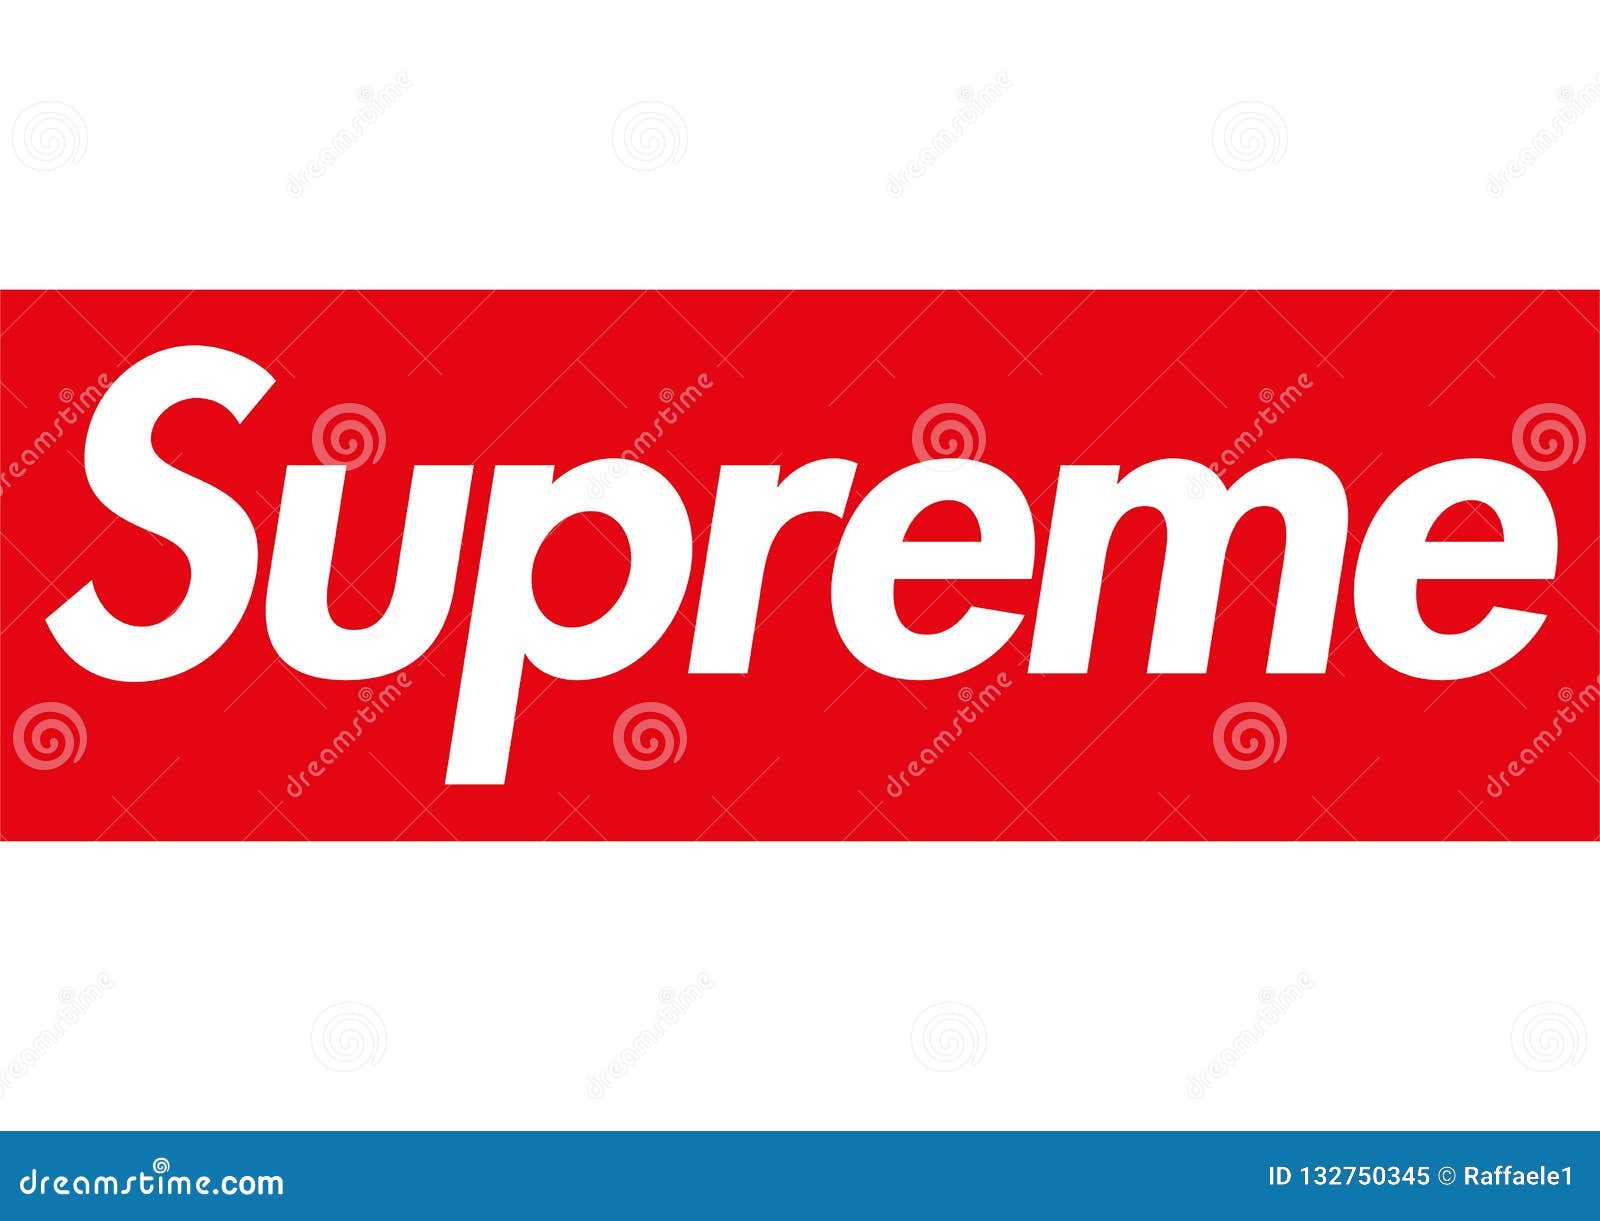 Supreme Logo Editorial Image Illustration Of Collection